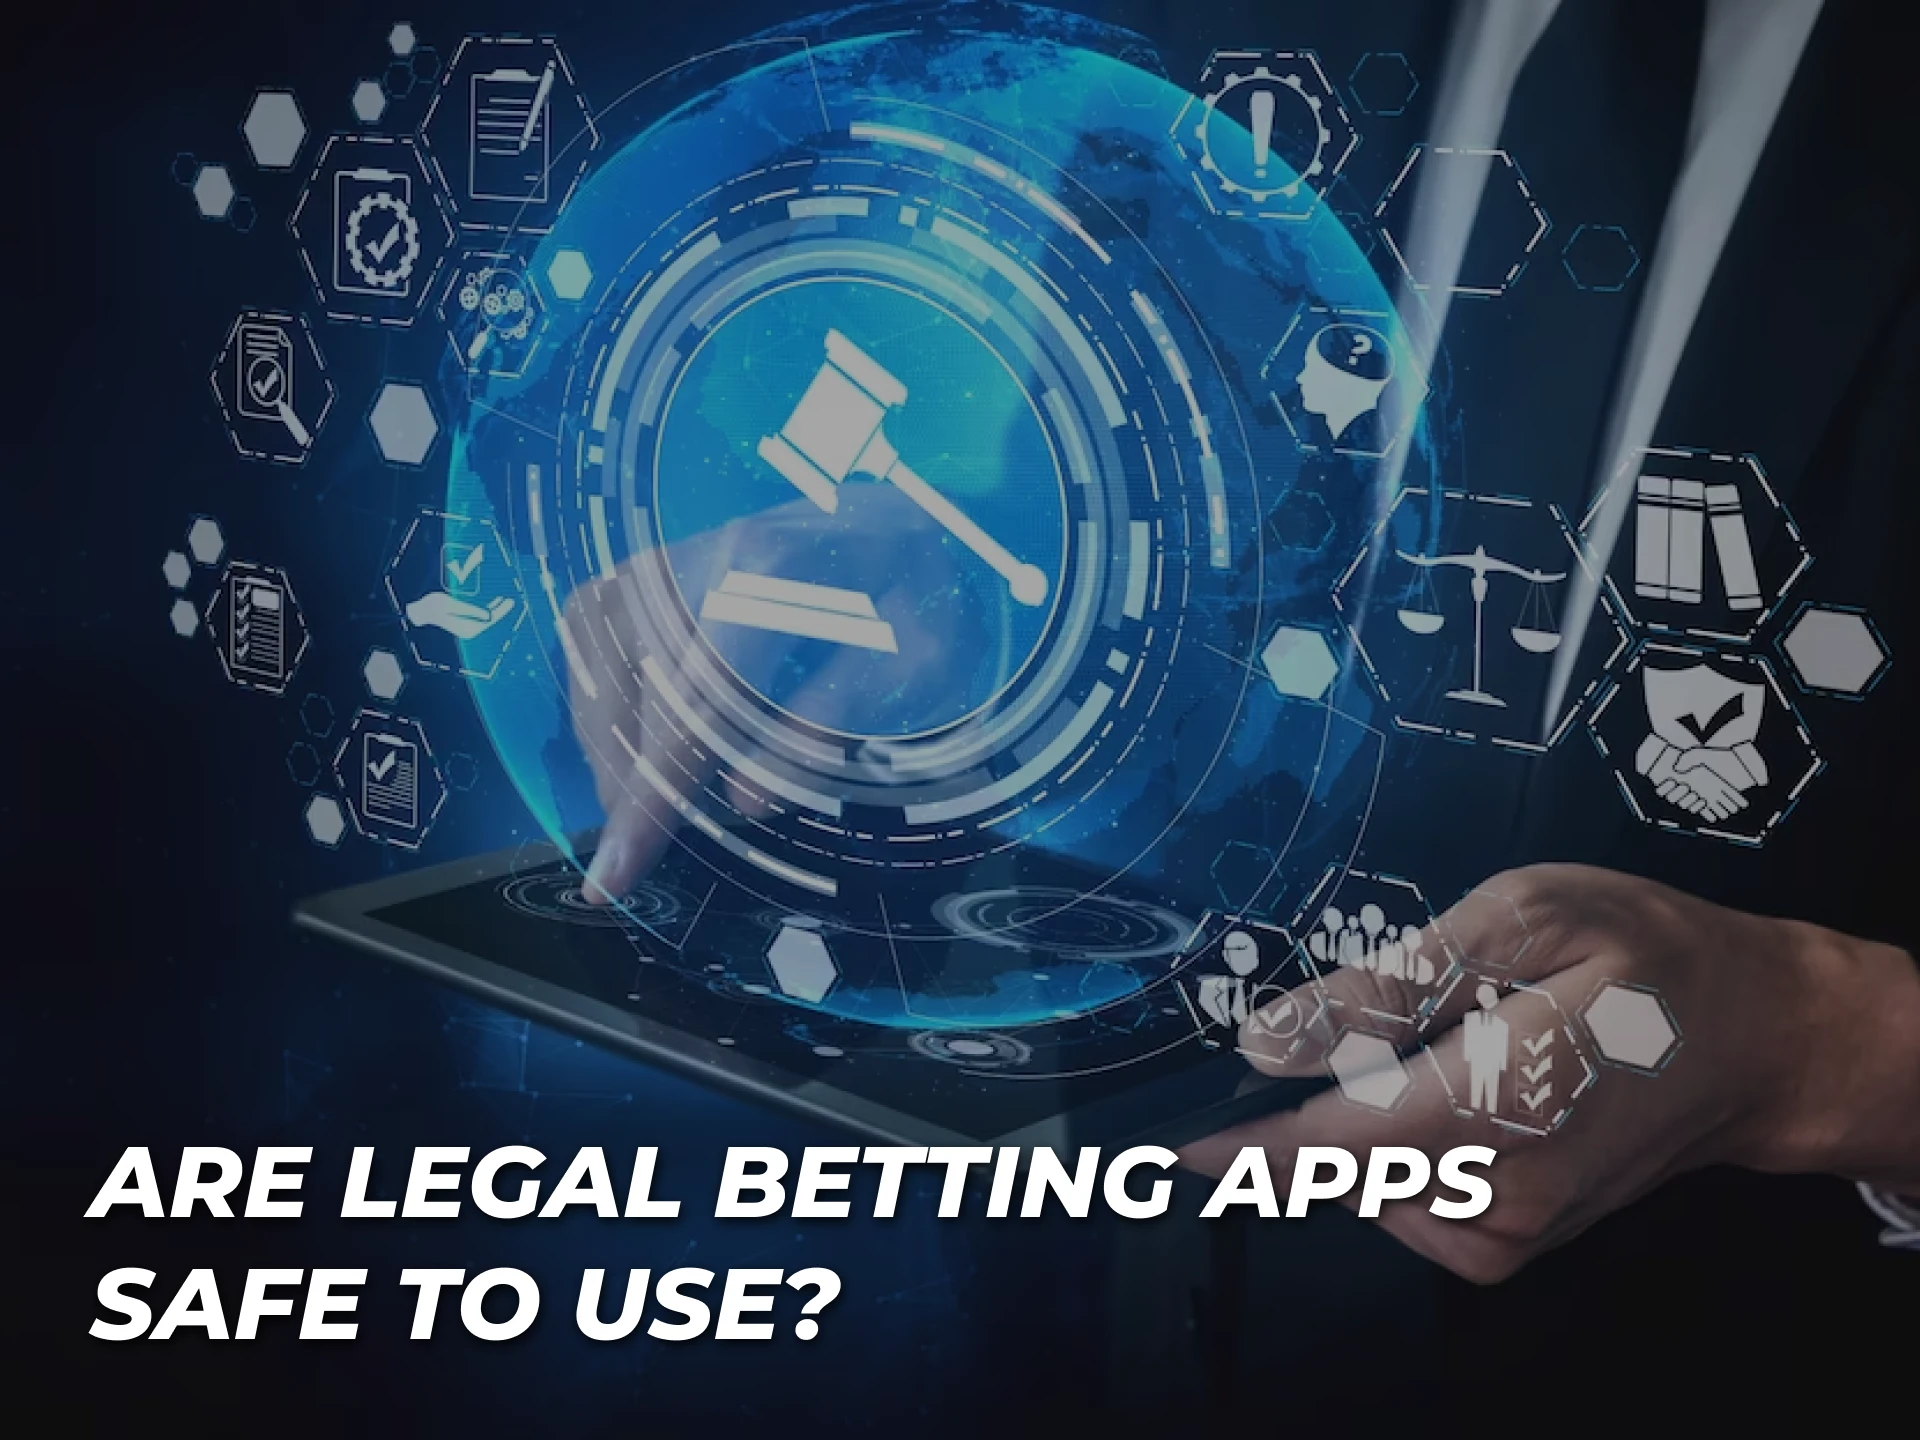 All online sports betting apps on our list are safe and legal.